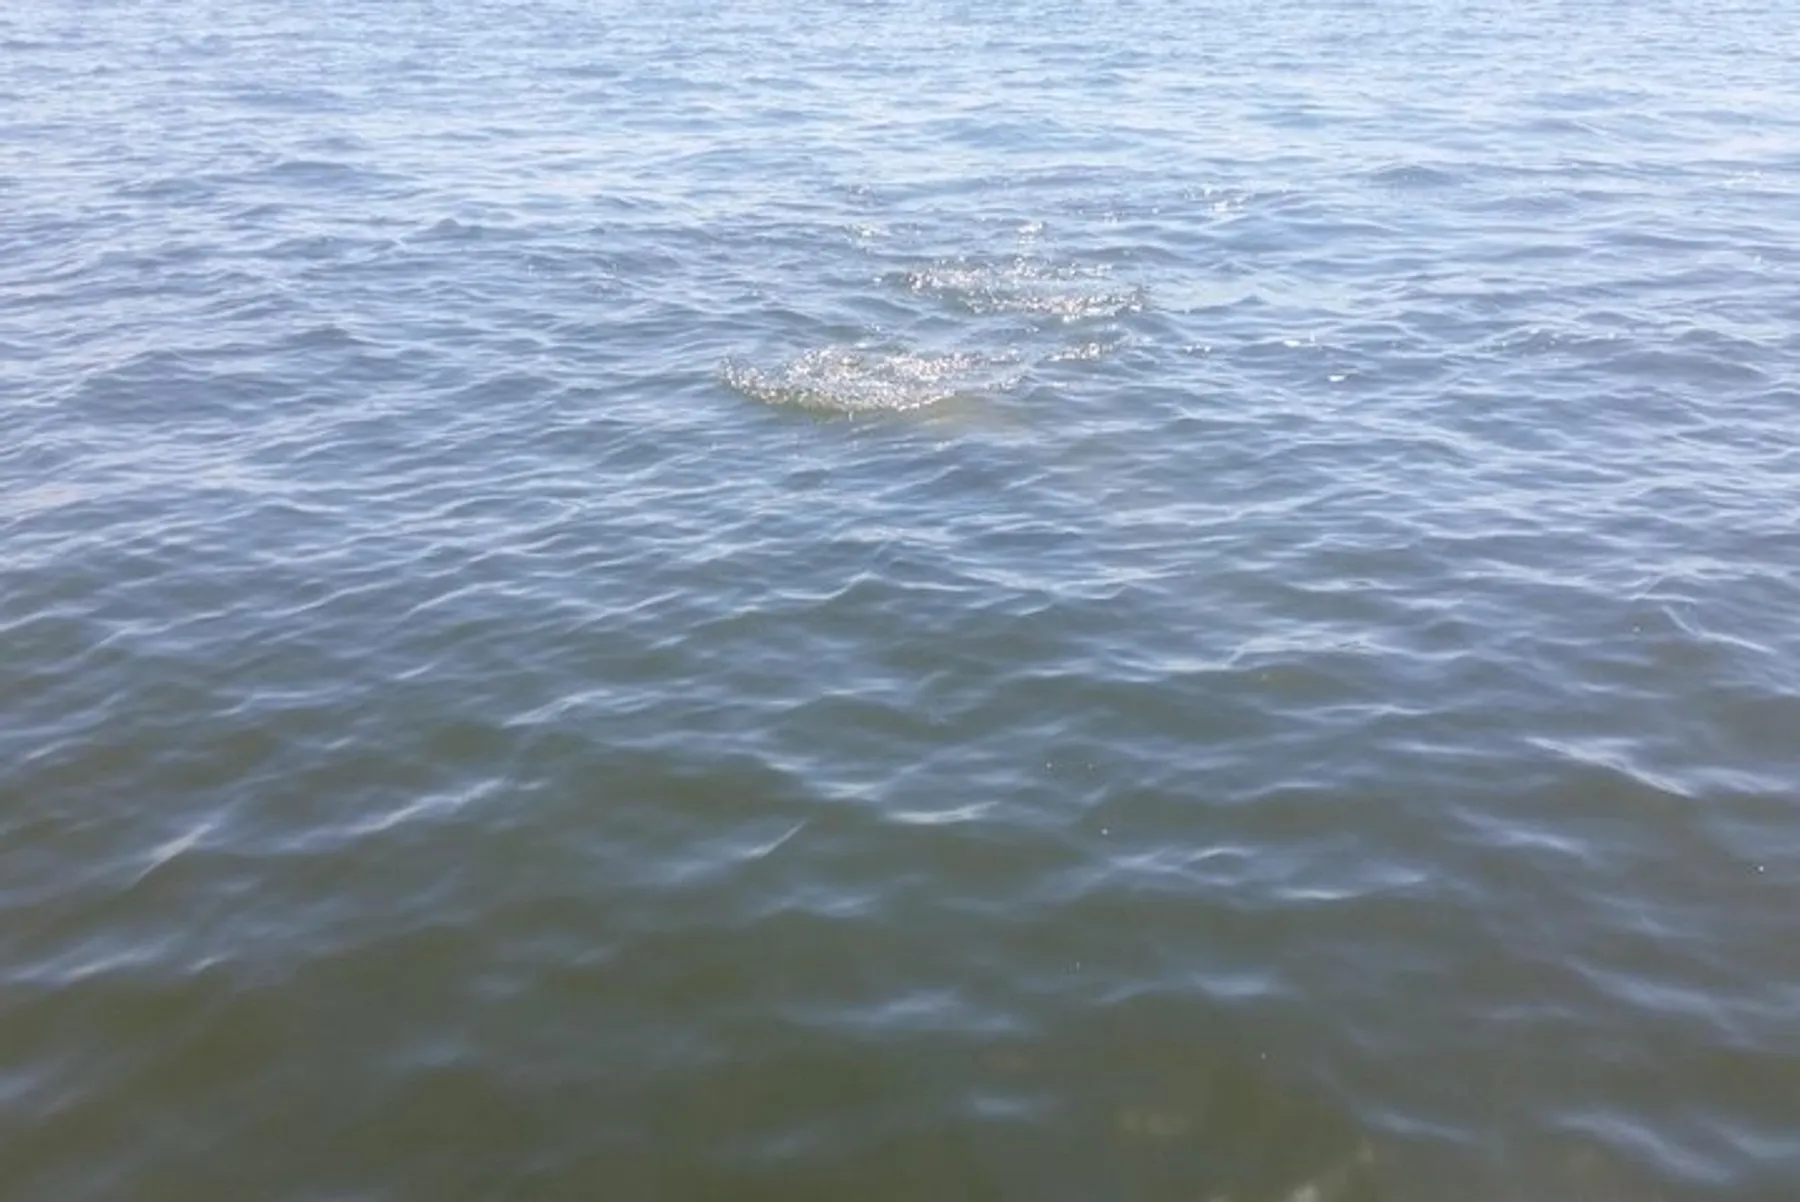 The image shows a calm expanse of water with light ripples and a small area where the surface is disturbed, possibly by a submerged object or aquatic creature.